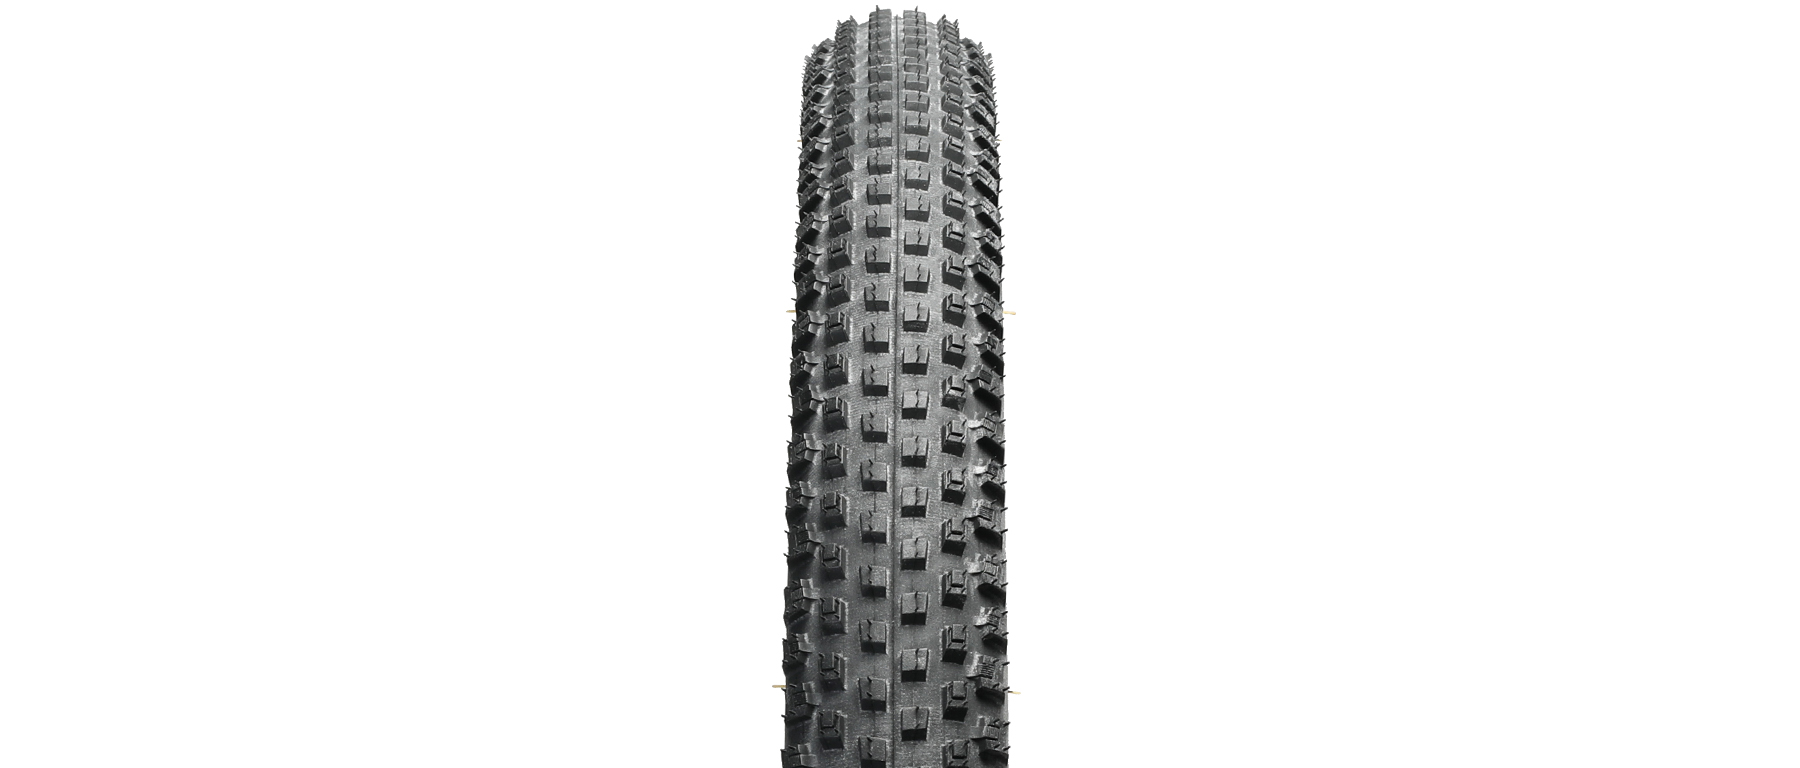 Specialized Renegade CONTROL 2Bliss Ready T5 Tire